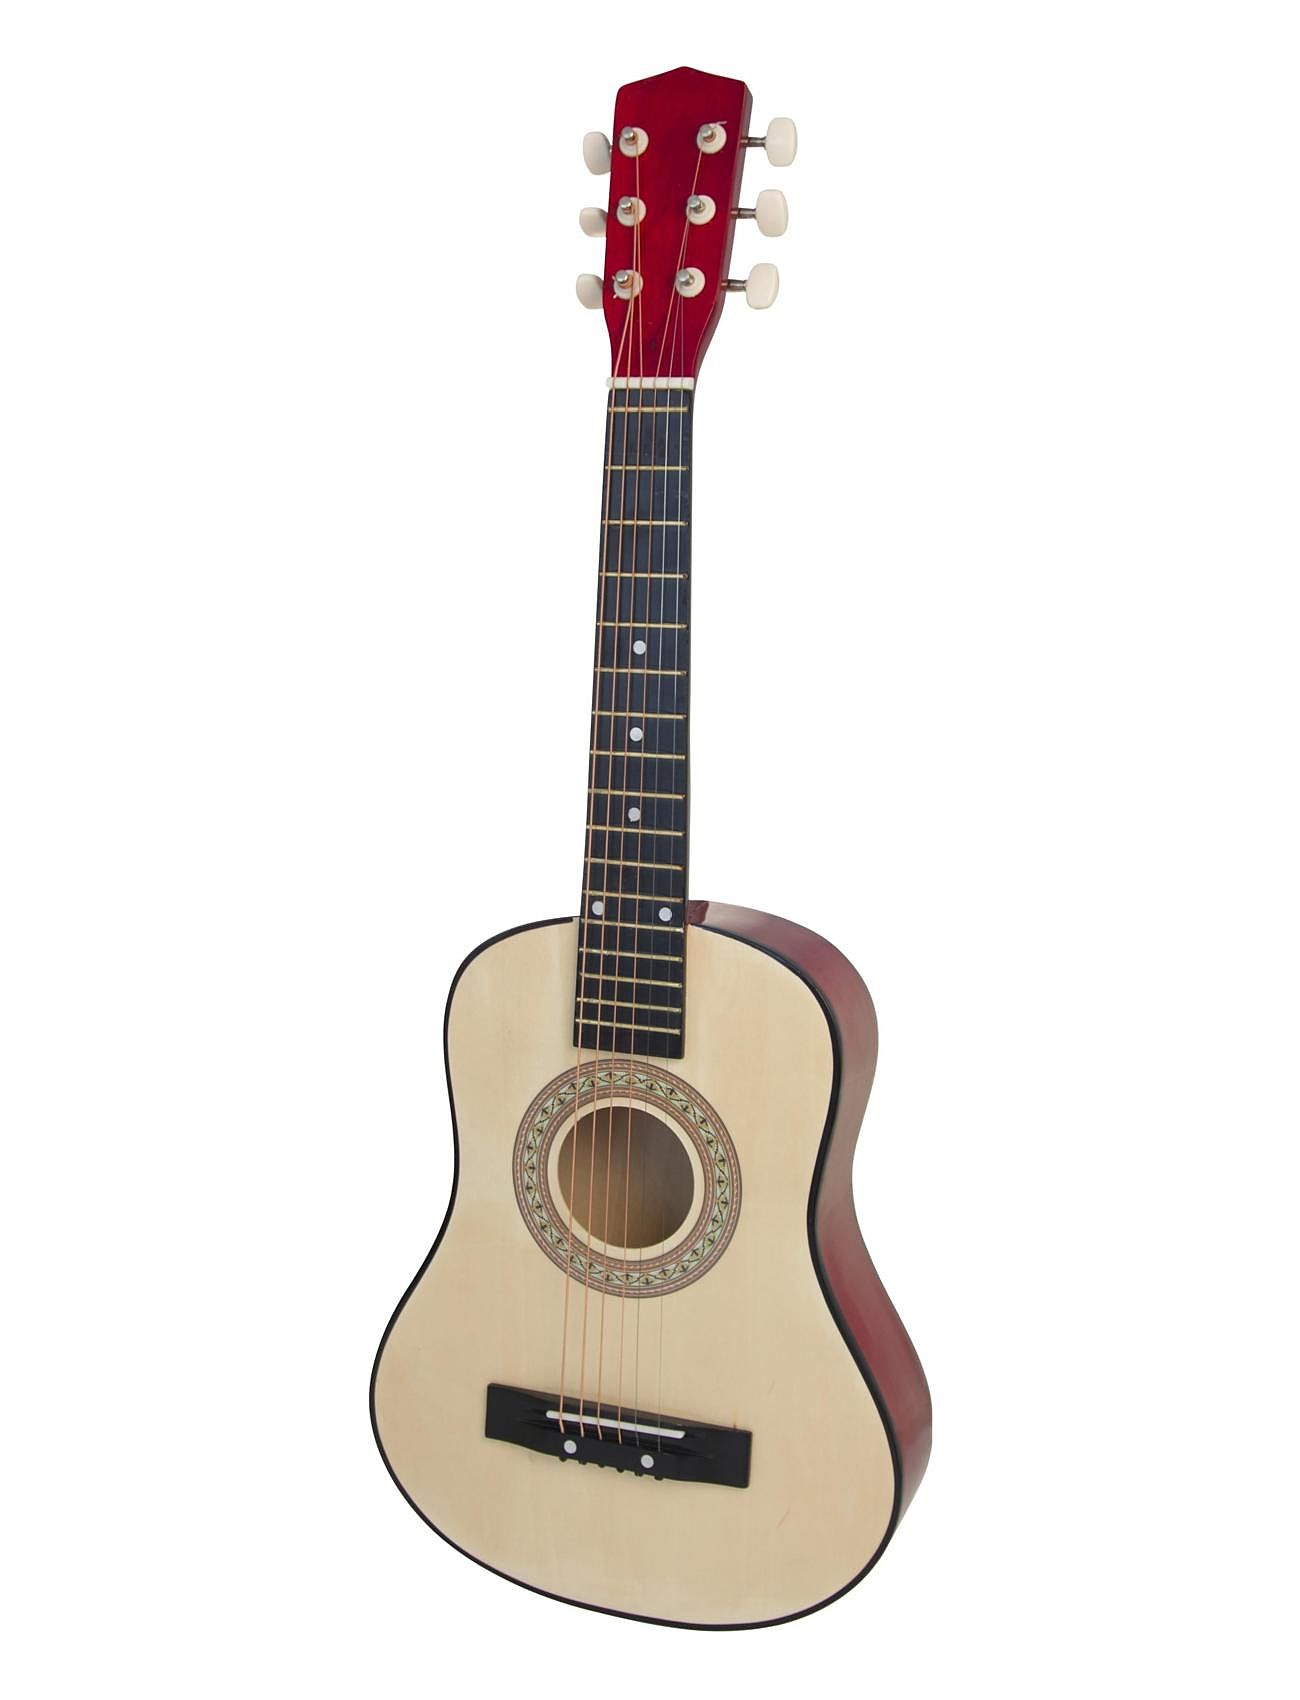 Mu Guitar 76 Cm Toys Musical Instruments Multi/patterned Music